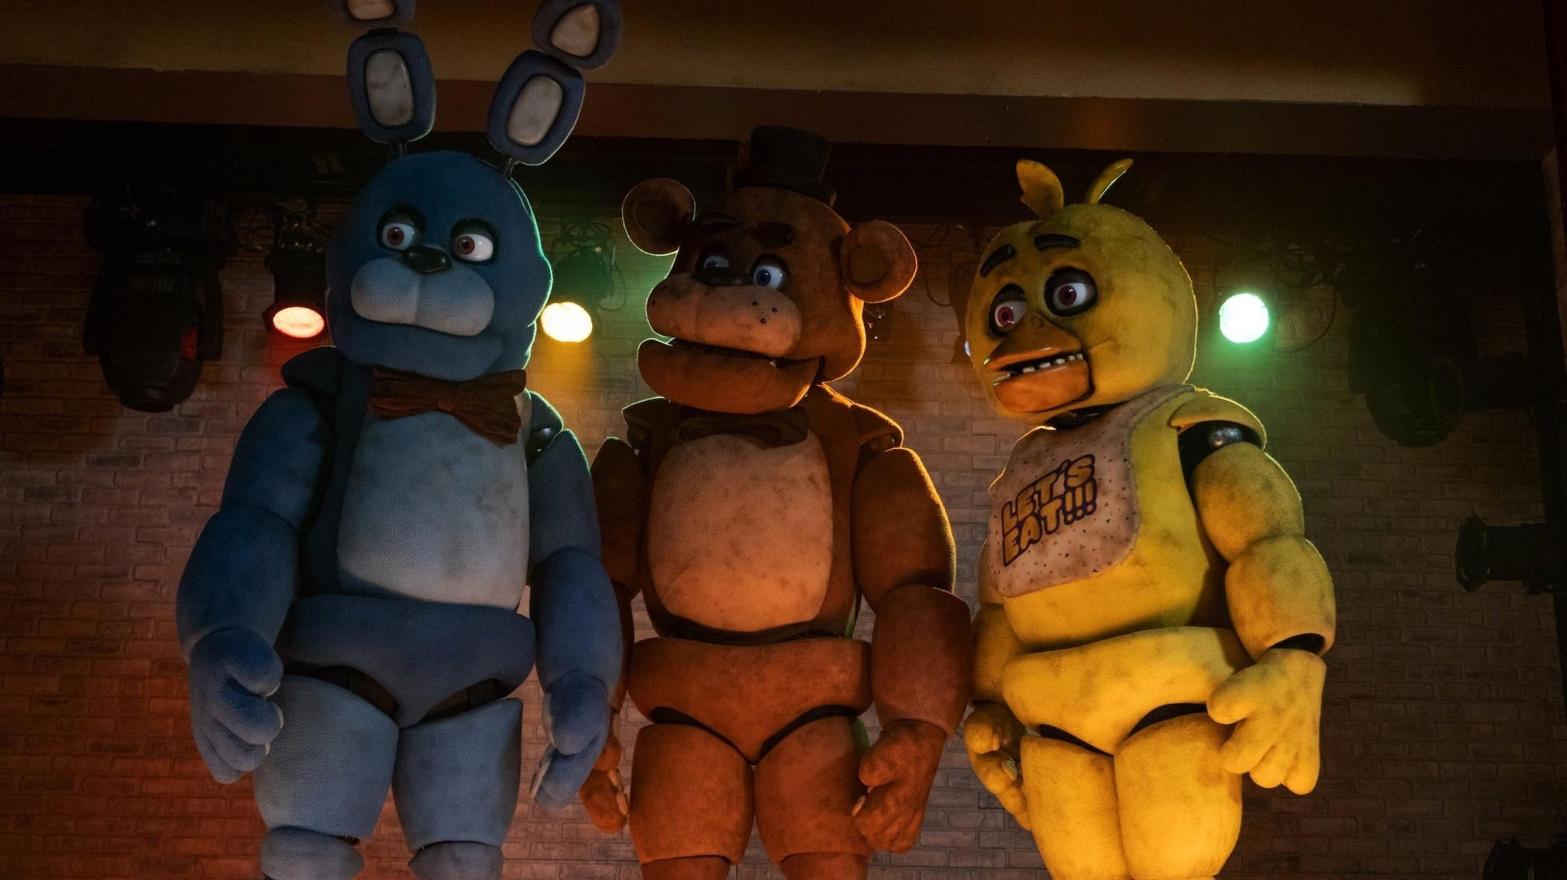 Your nightmares have new stars courtesy of Five Nights at Freddy's. (Image: Universal)